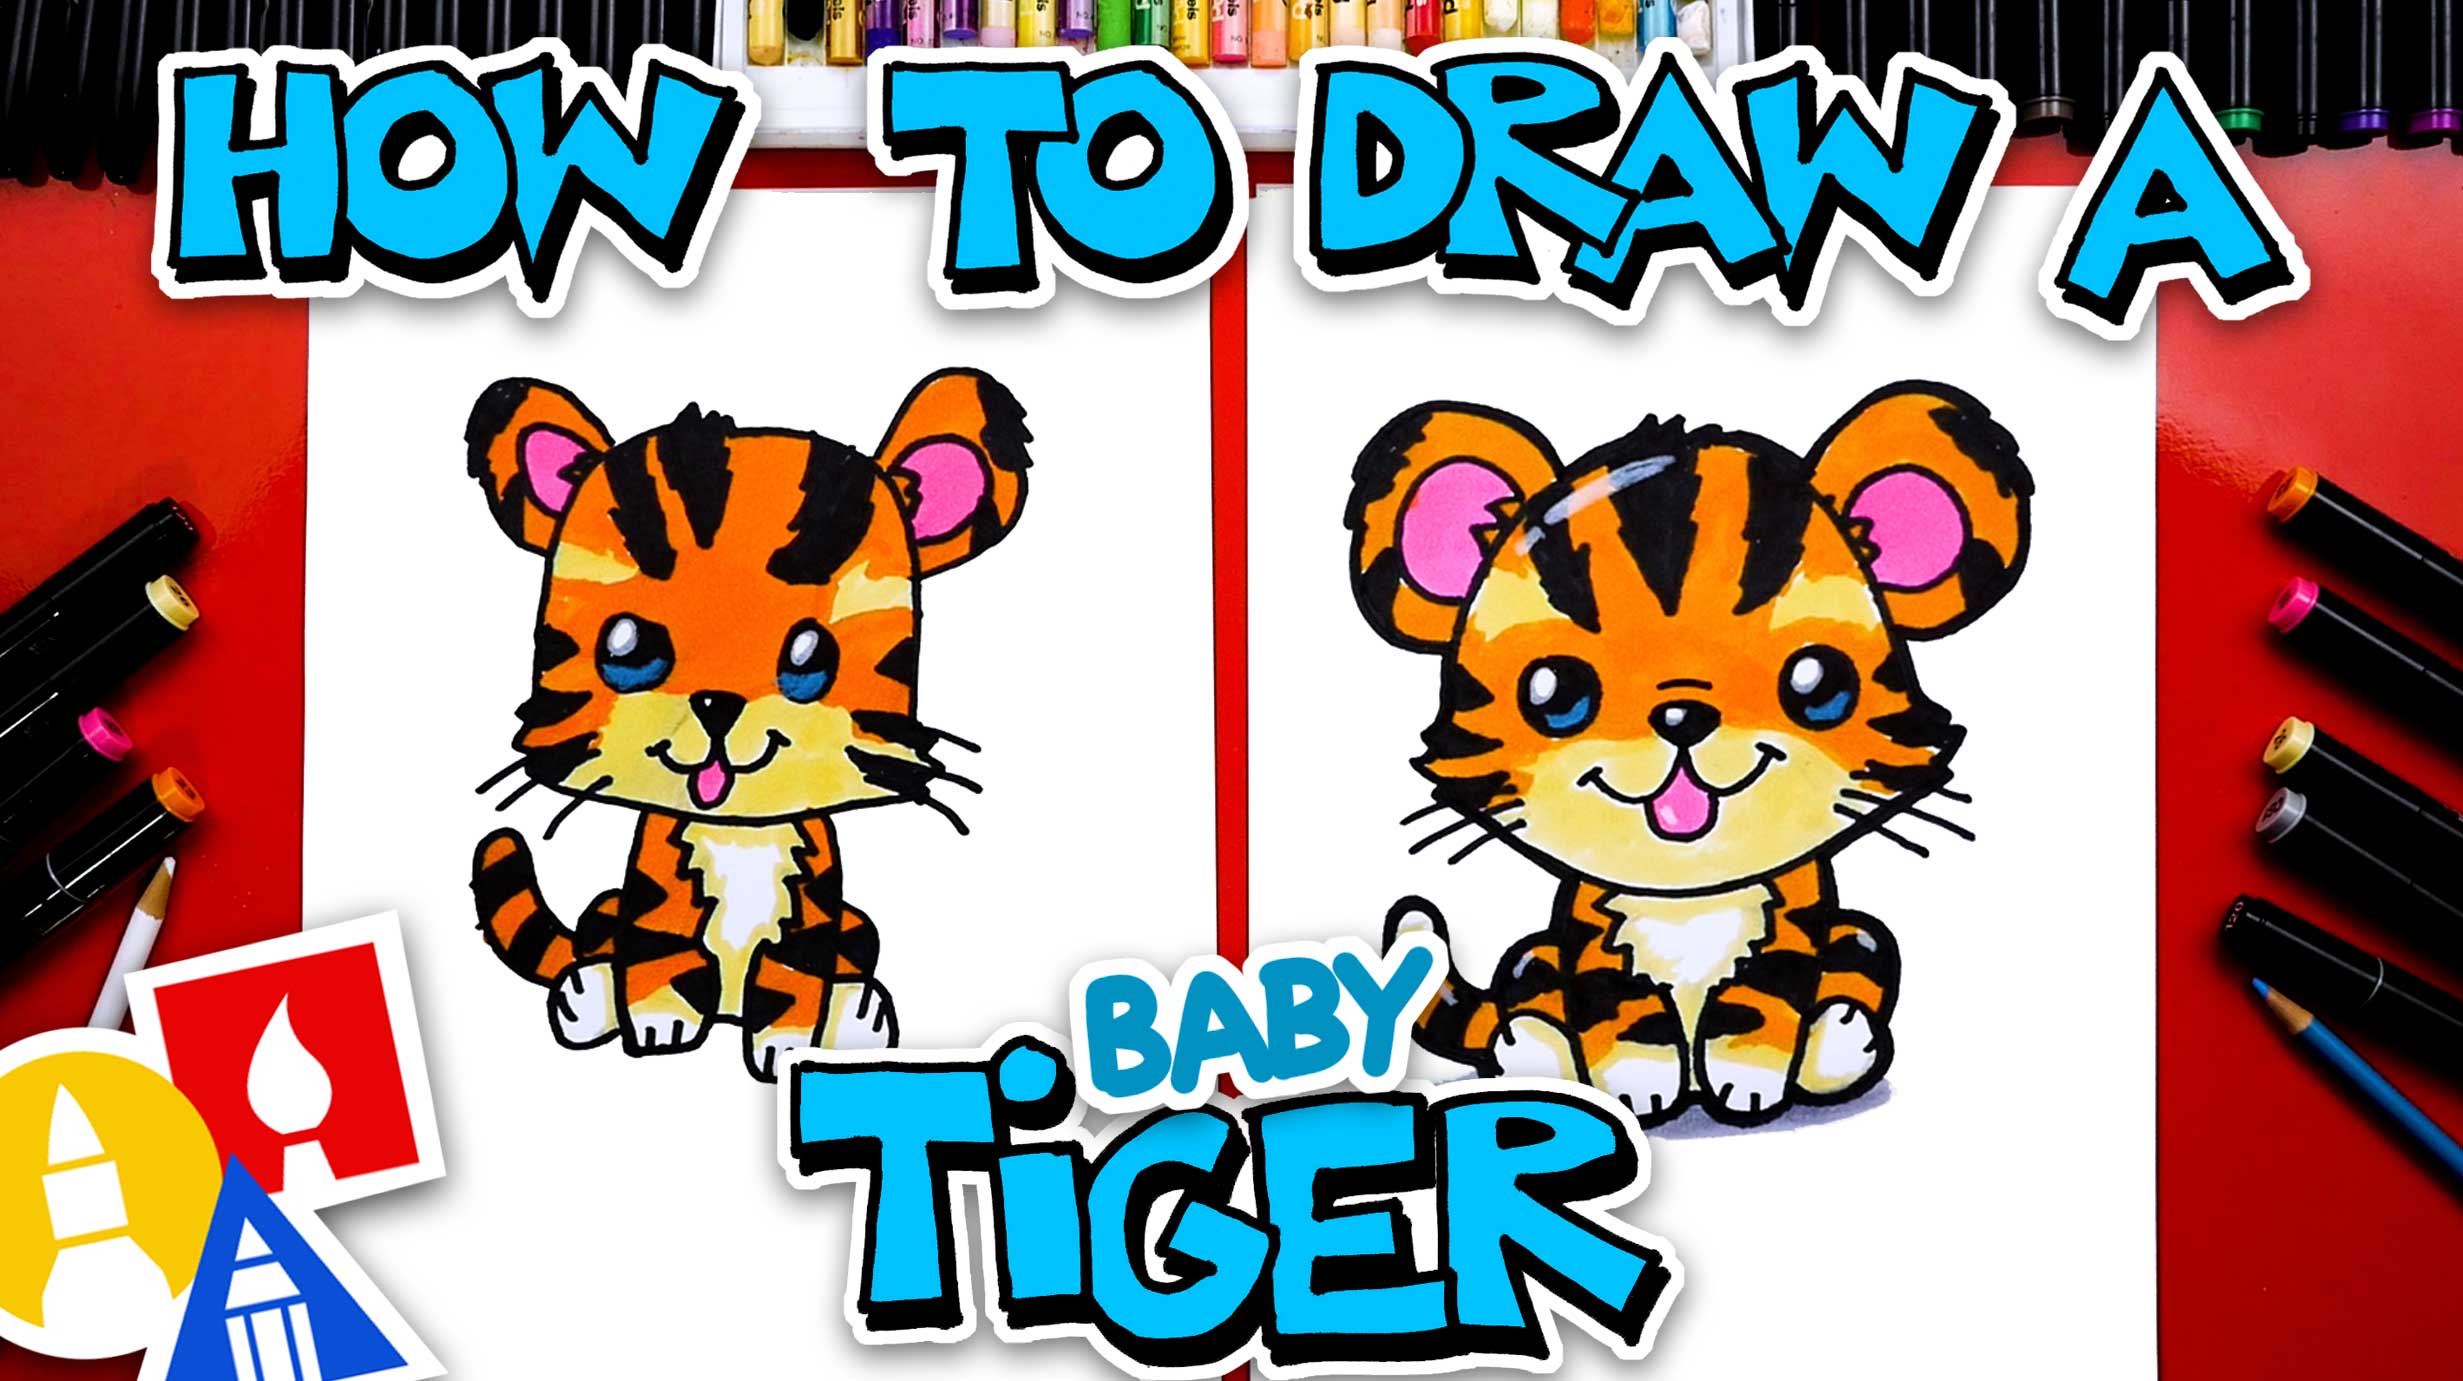 How To Draw A Baby Tiger - Art For Kids Hub